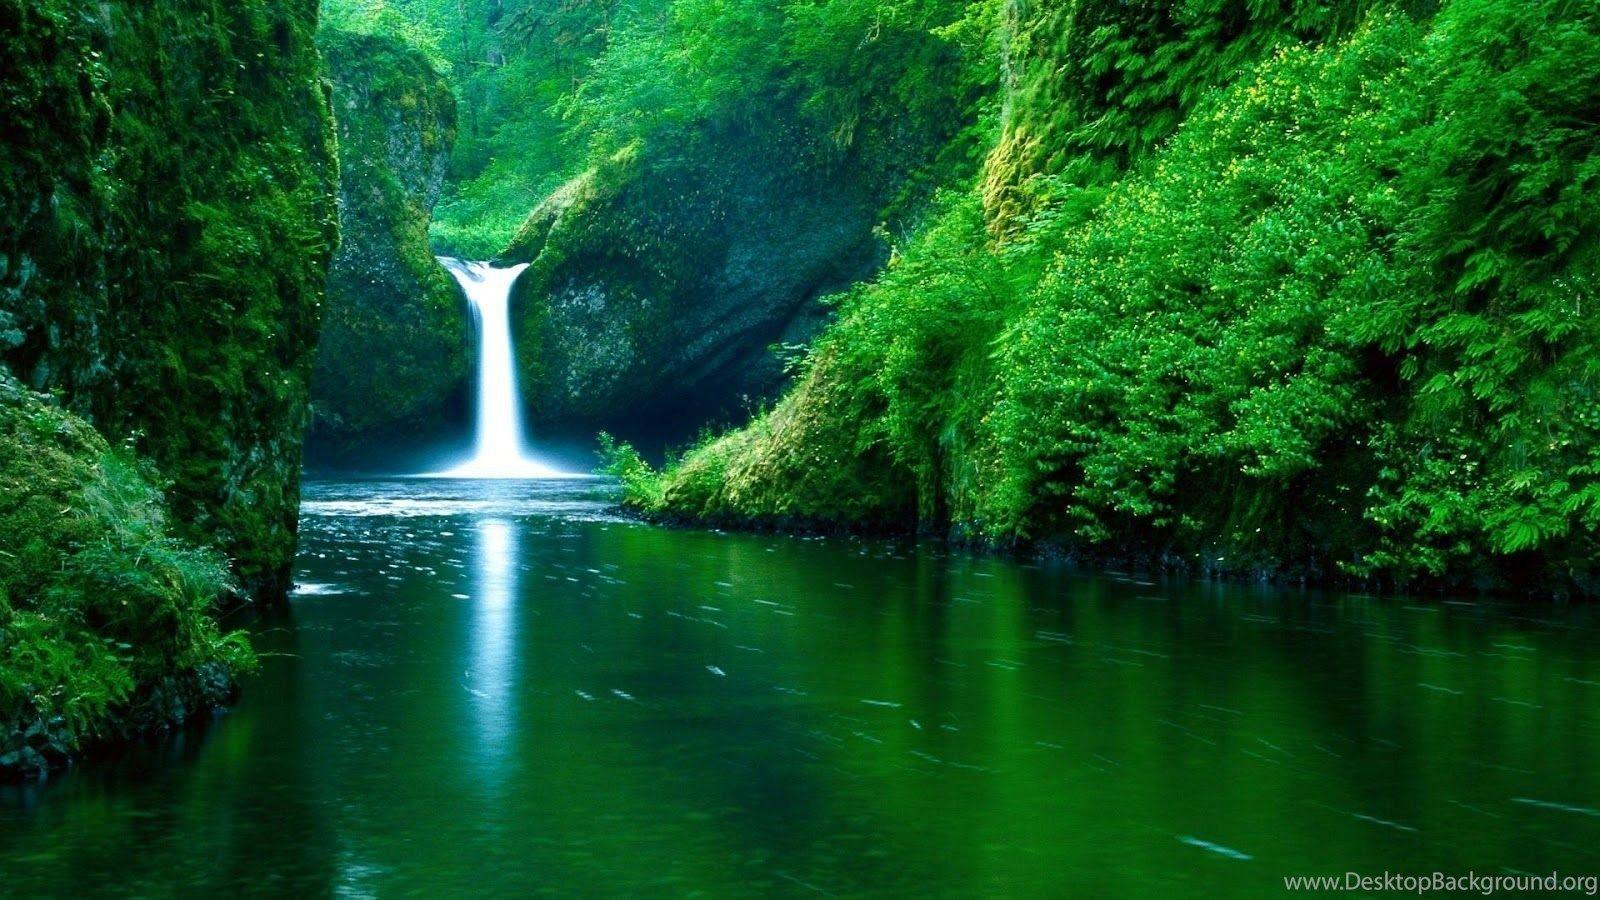 Waterfall forest green full HD nature background wallpaper